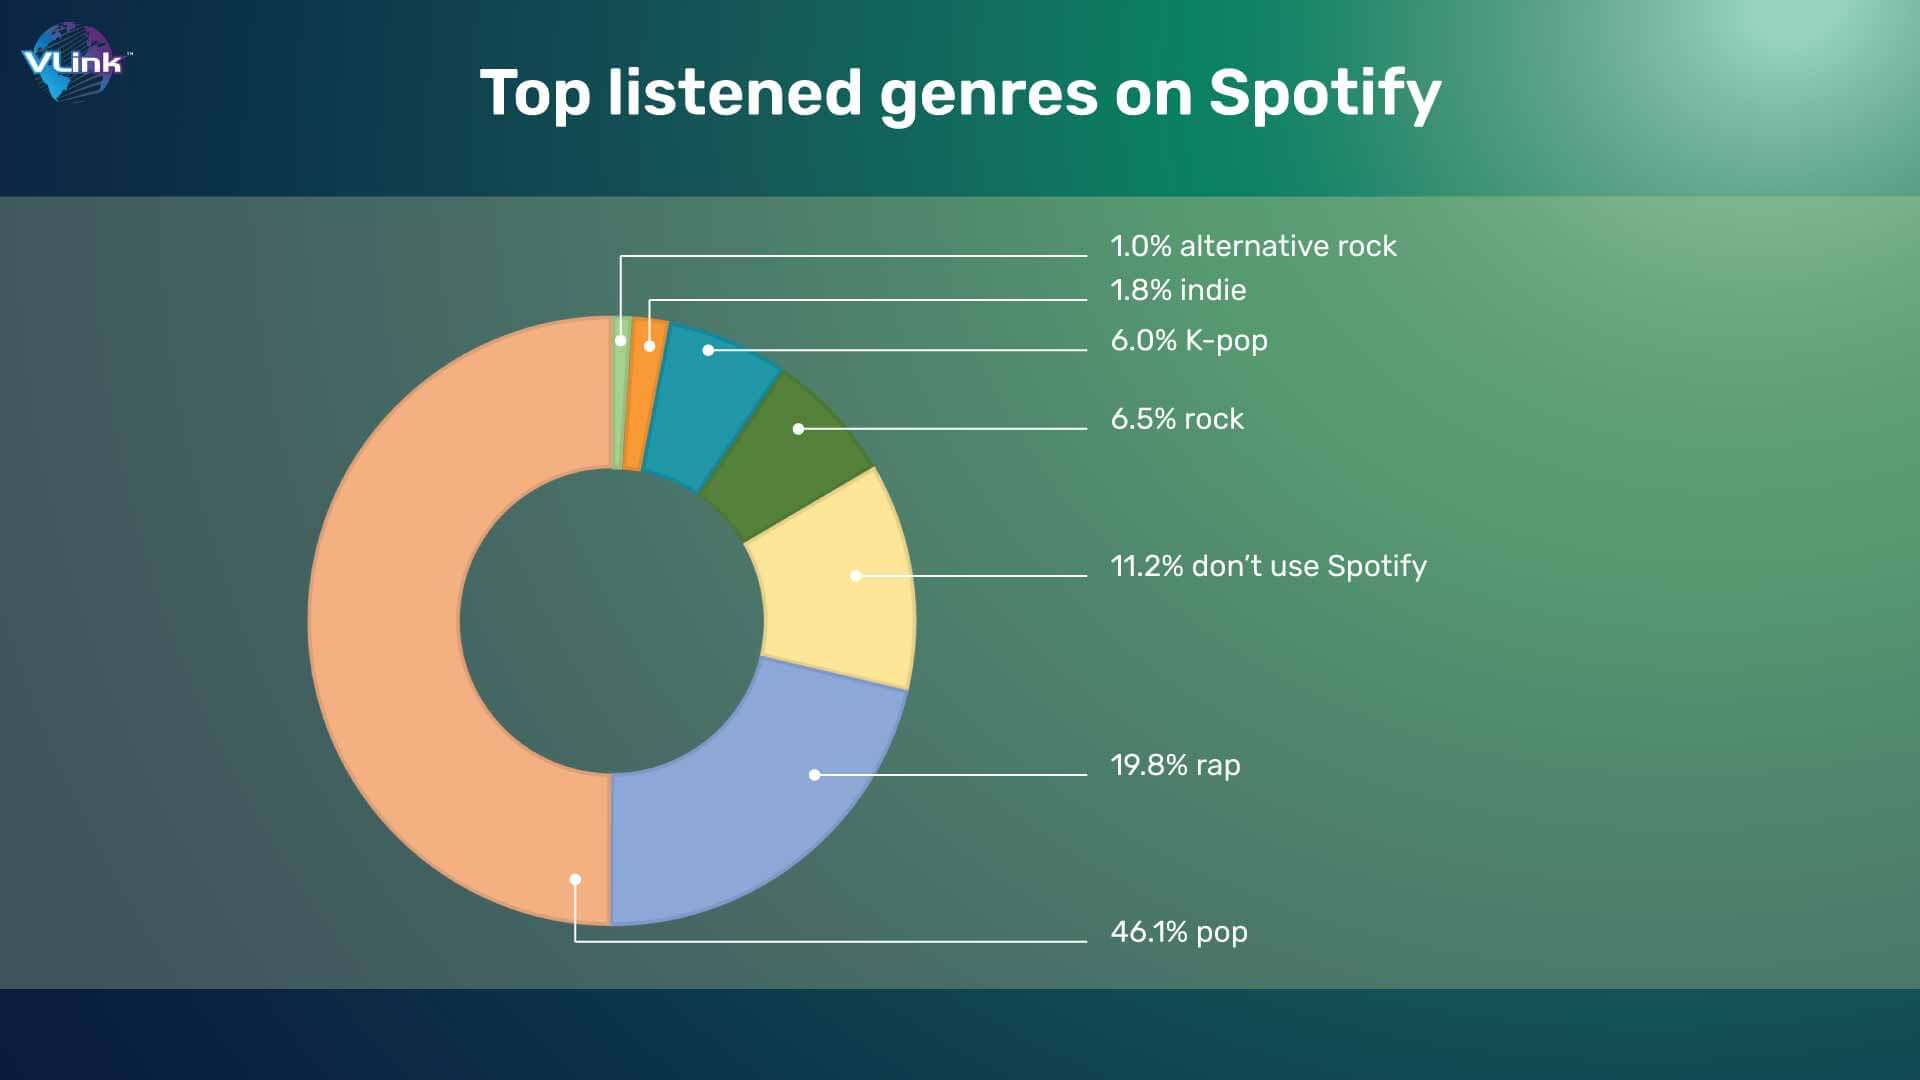 Top listened genres on Spotify